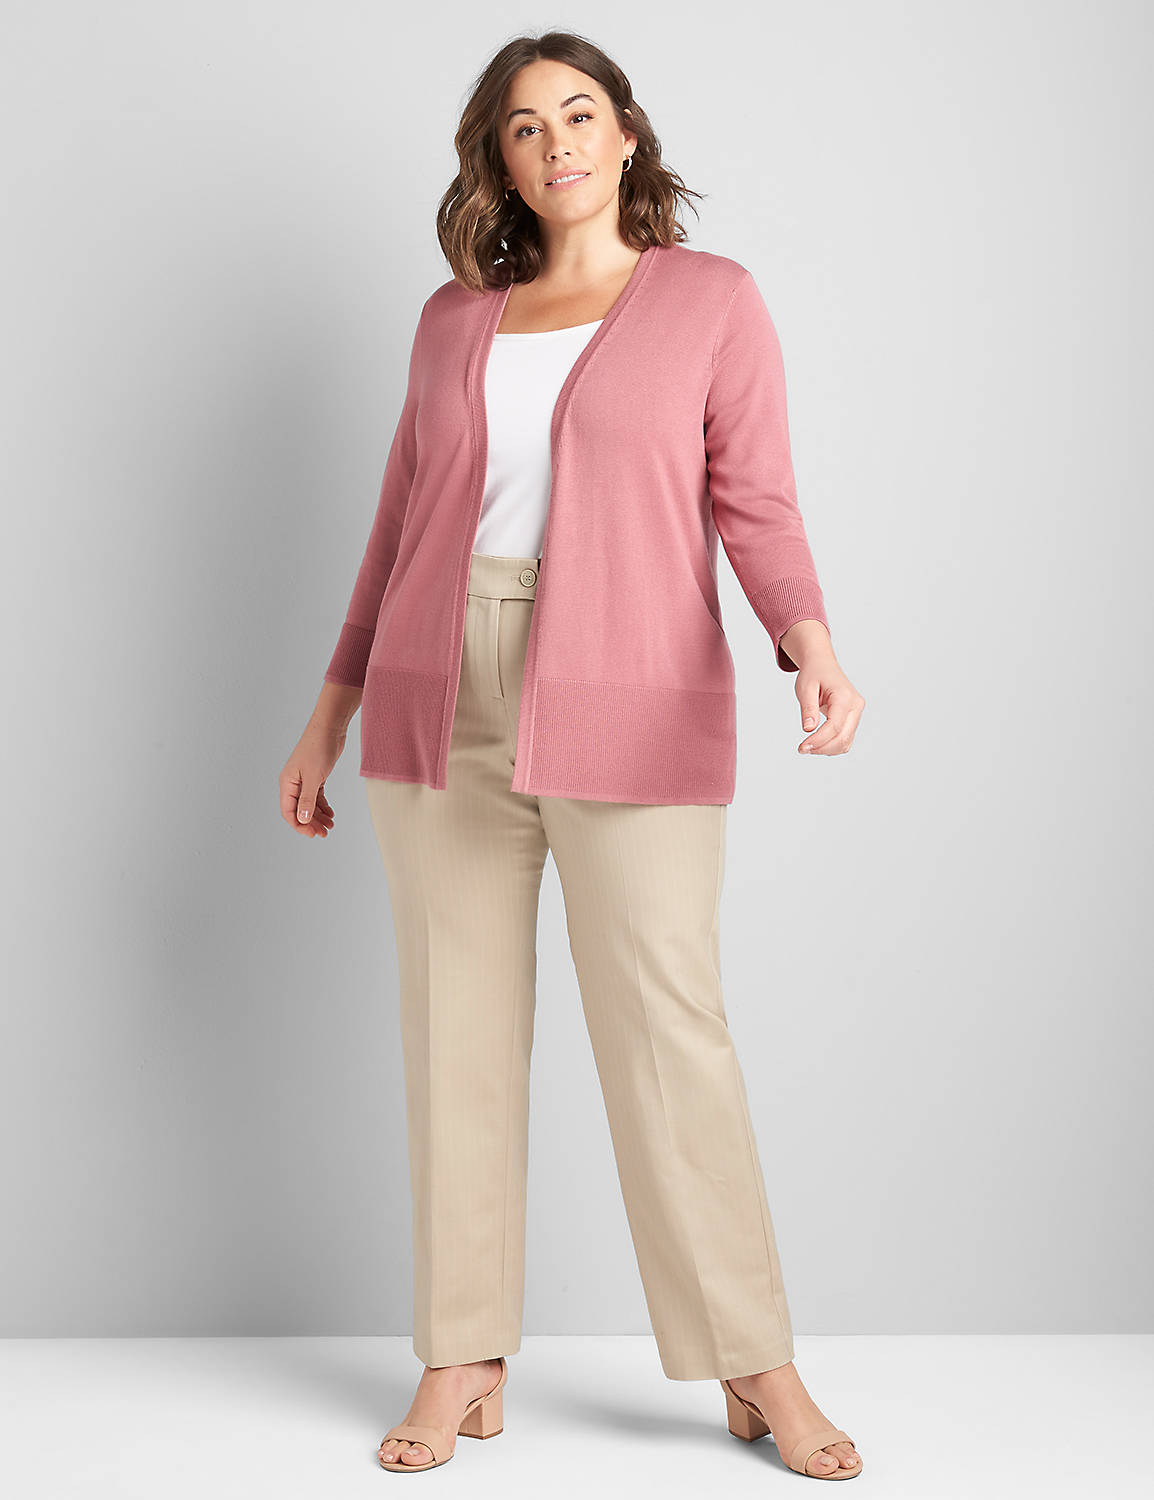 Signature Fit Straight Pant Product Image 3